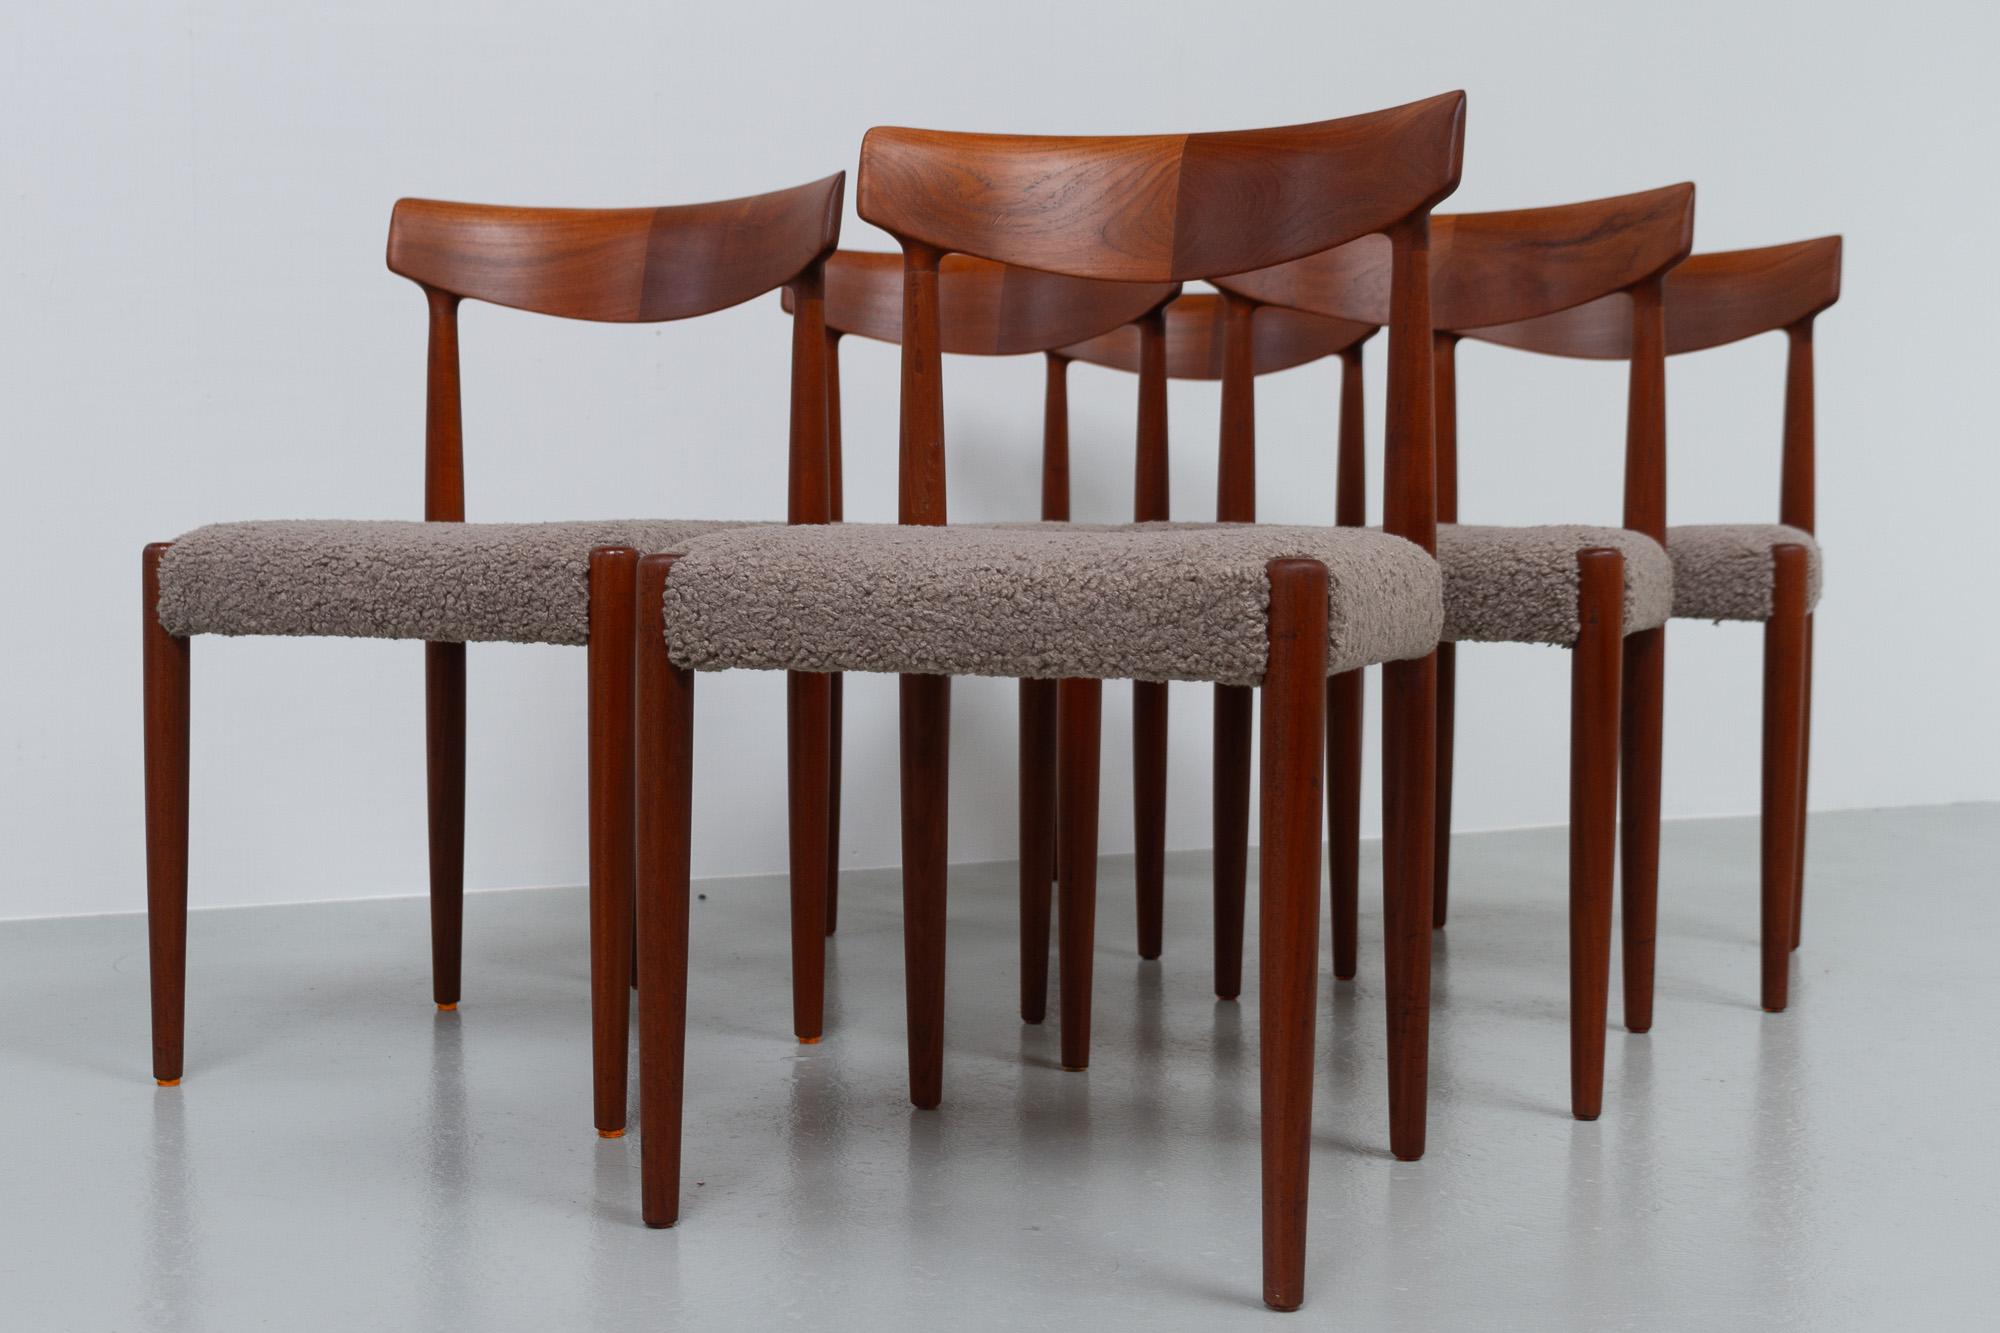 Mid-20th Century Danish Modern Teak Dining Chairs by Knud Færch for Slagelse, 1960s. Set of 6. For Sale